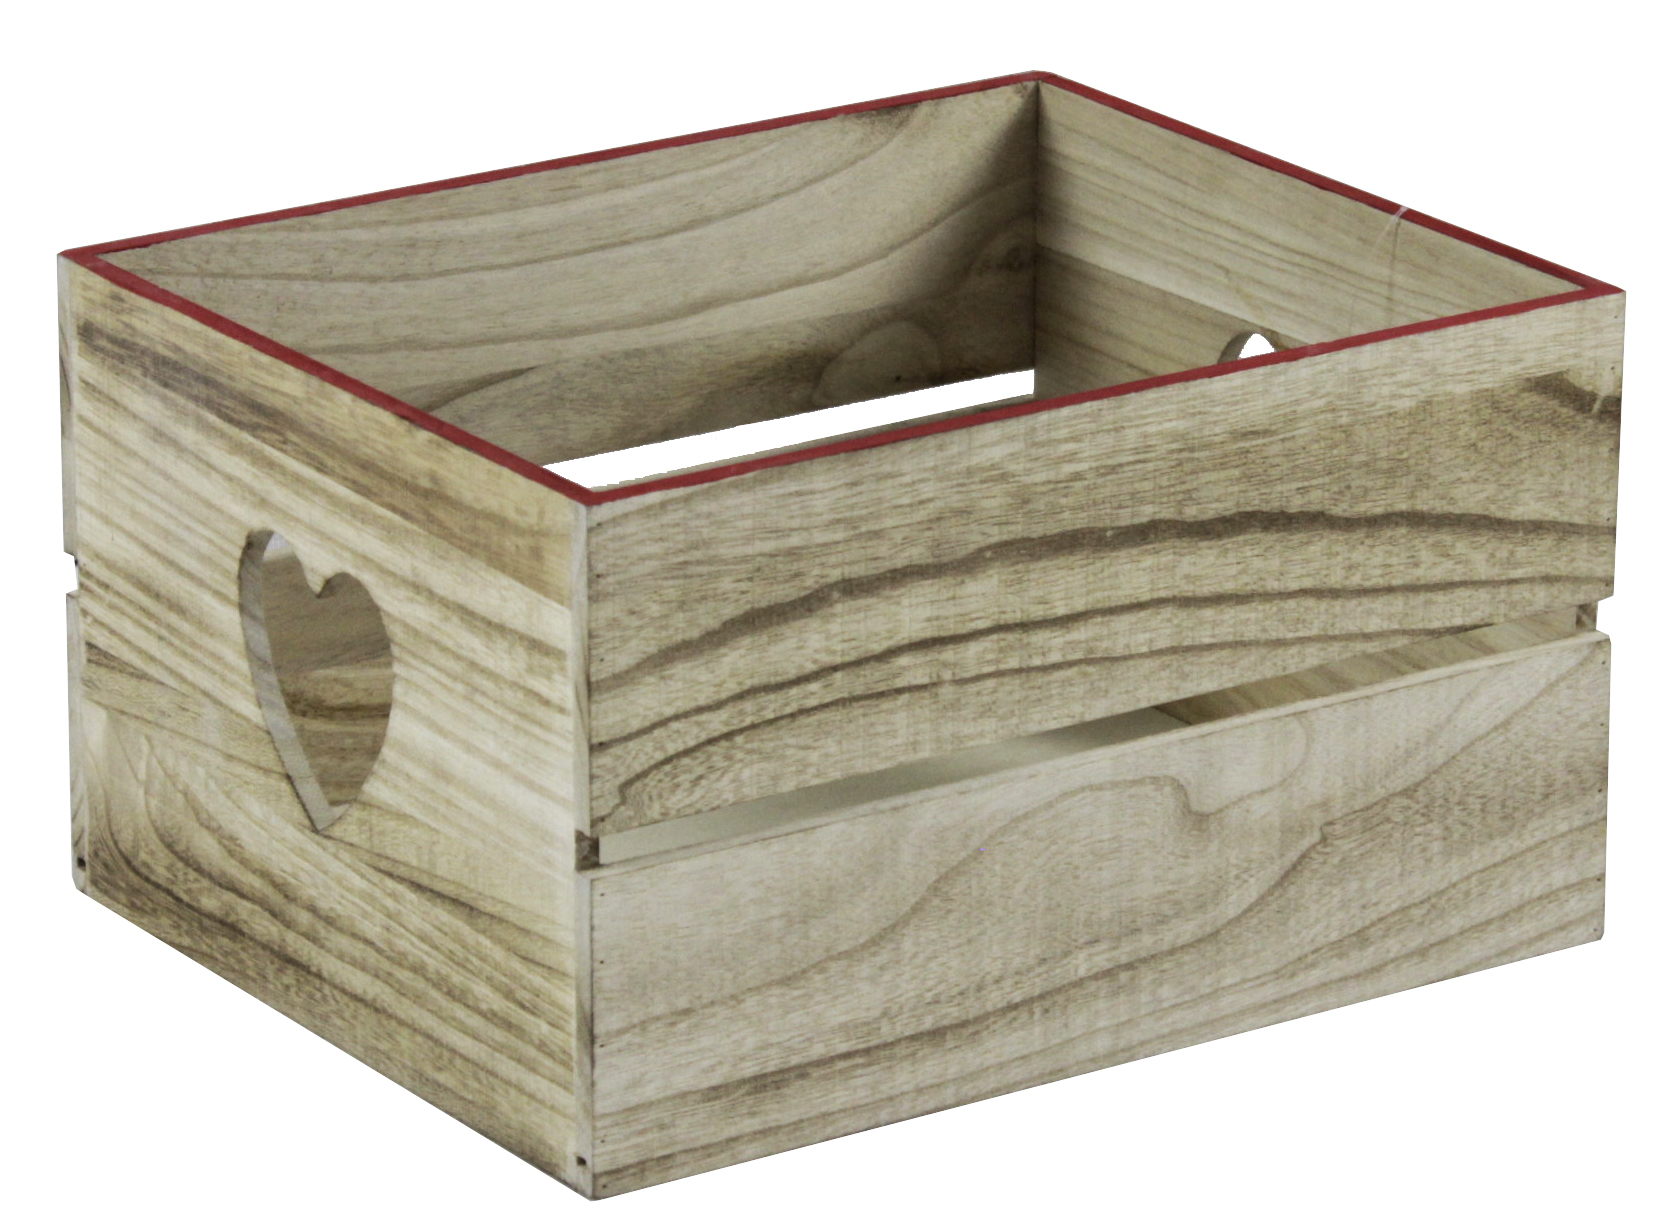 Nutmeg wooden crate with heart handles